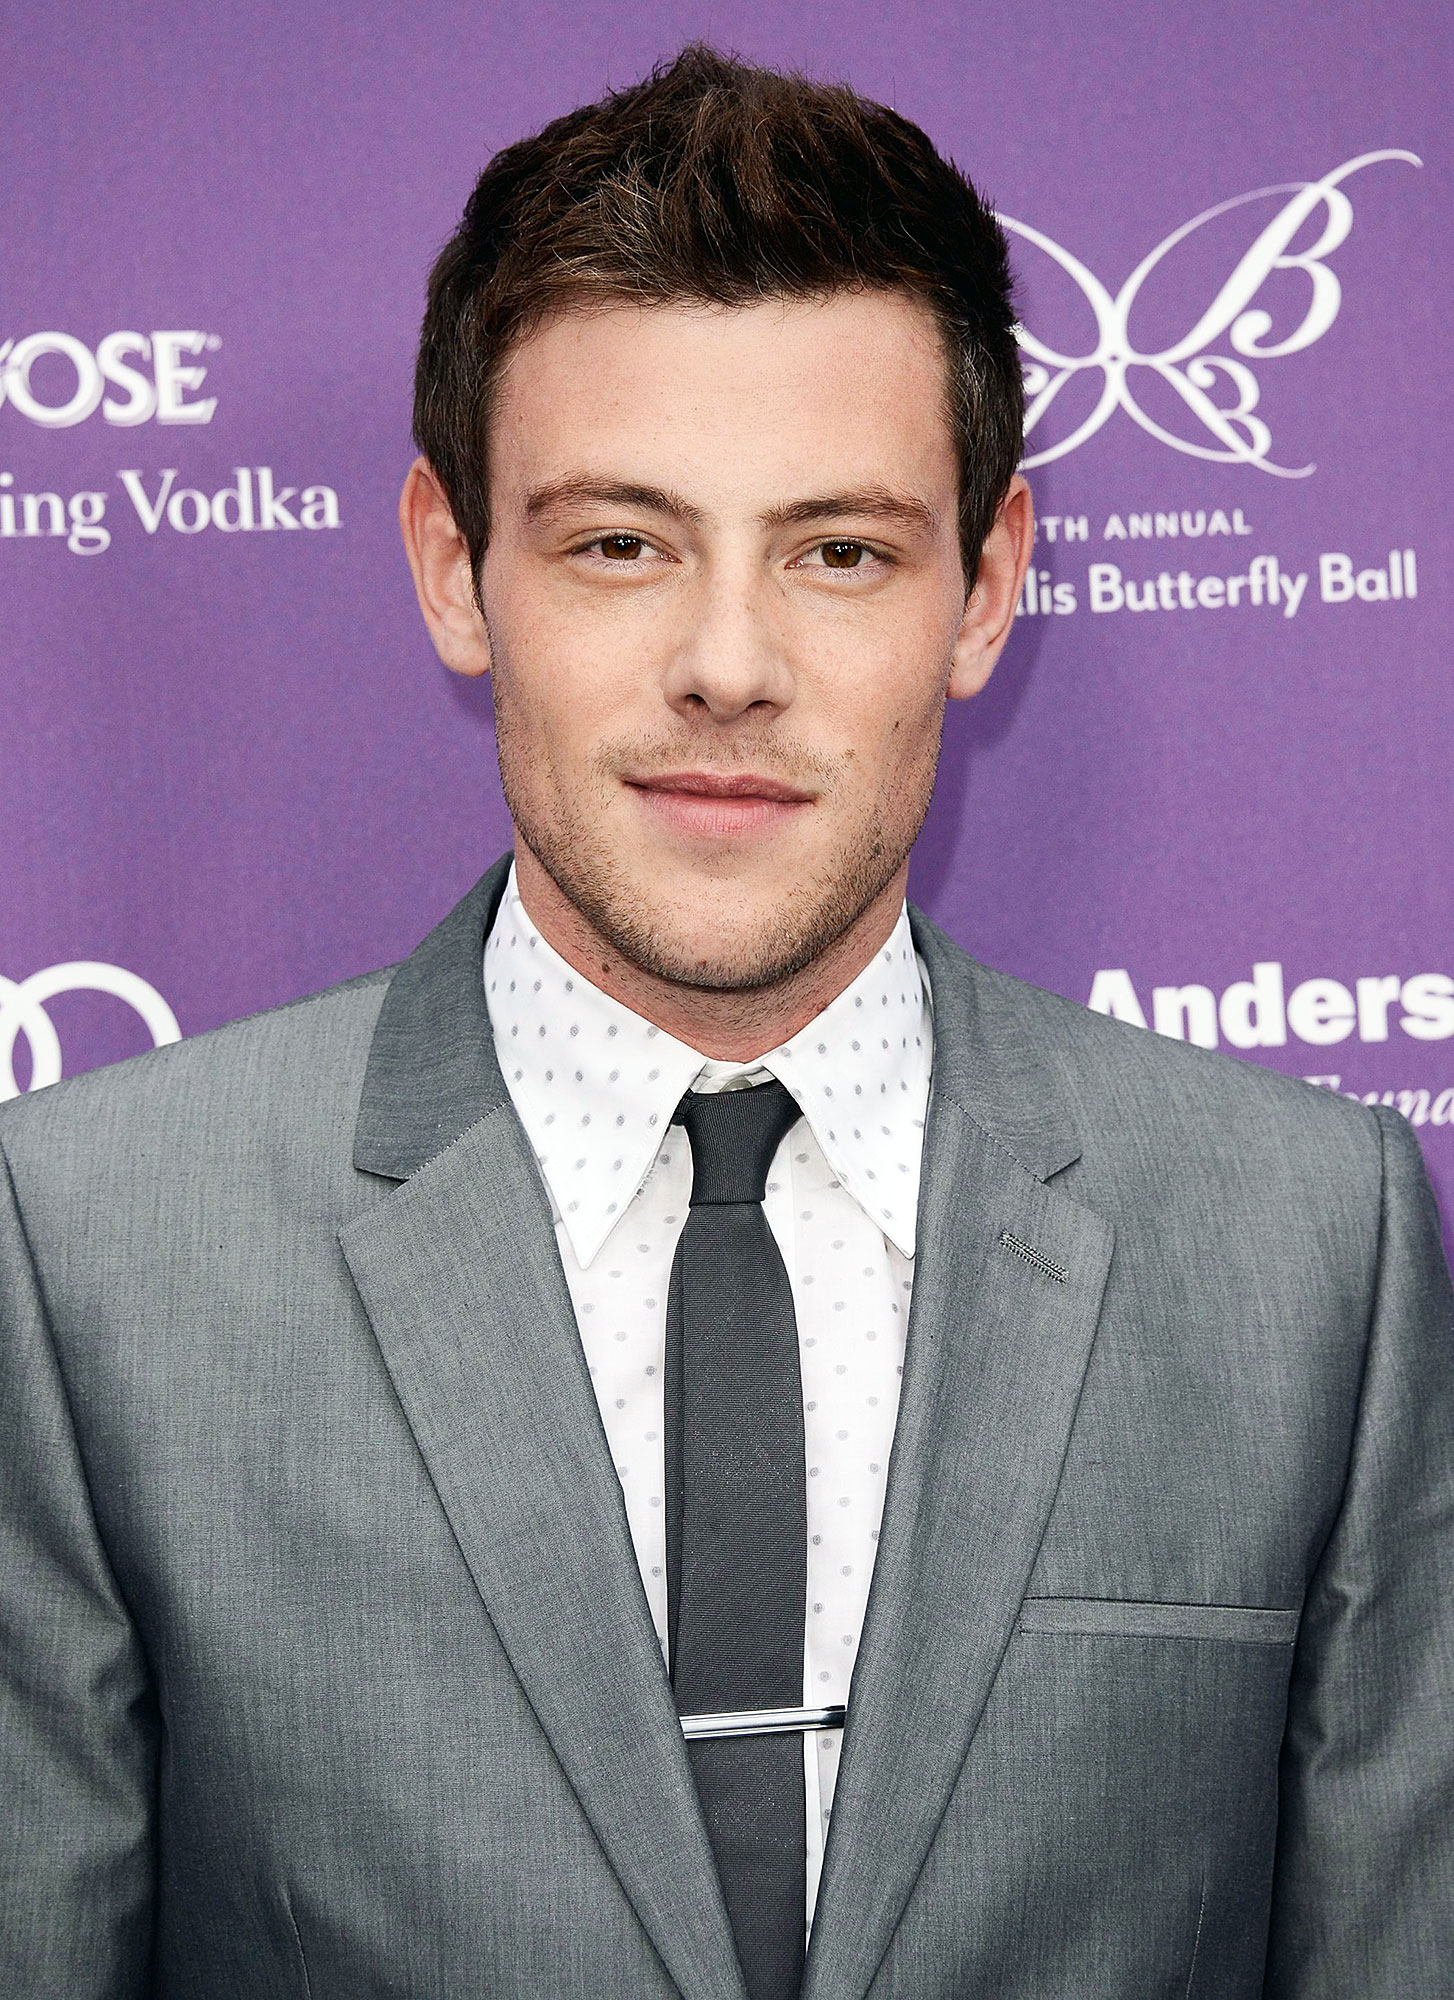 Did cory kill why himself monteith 15 Things